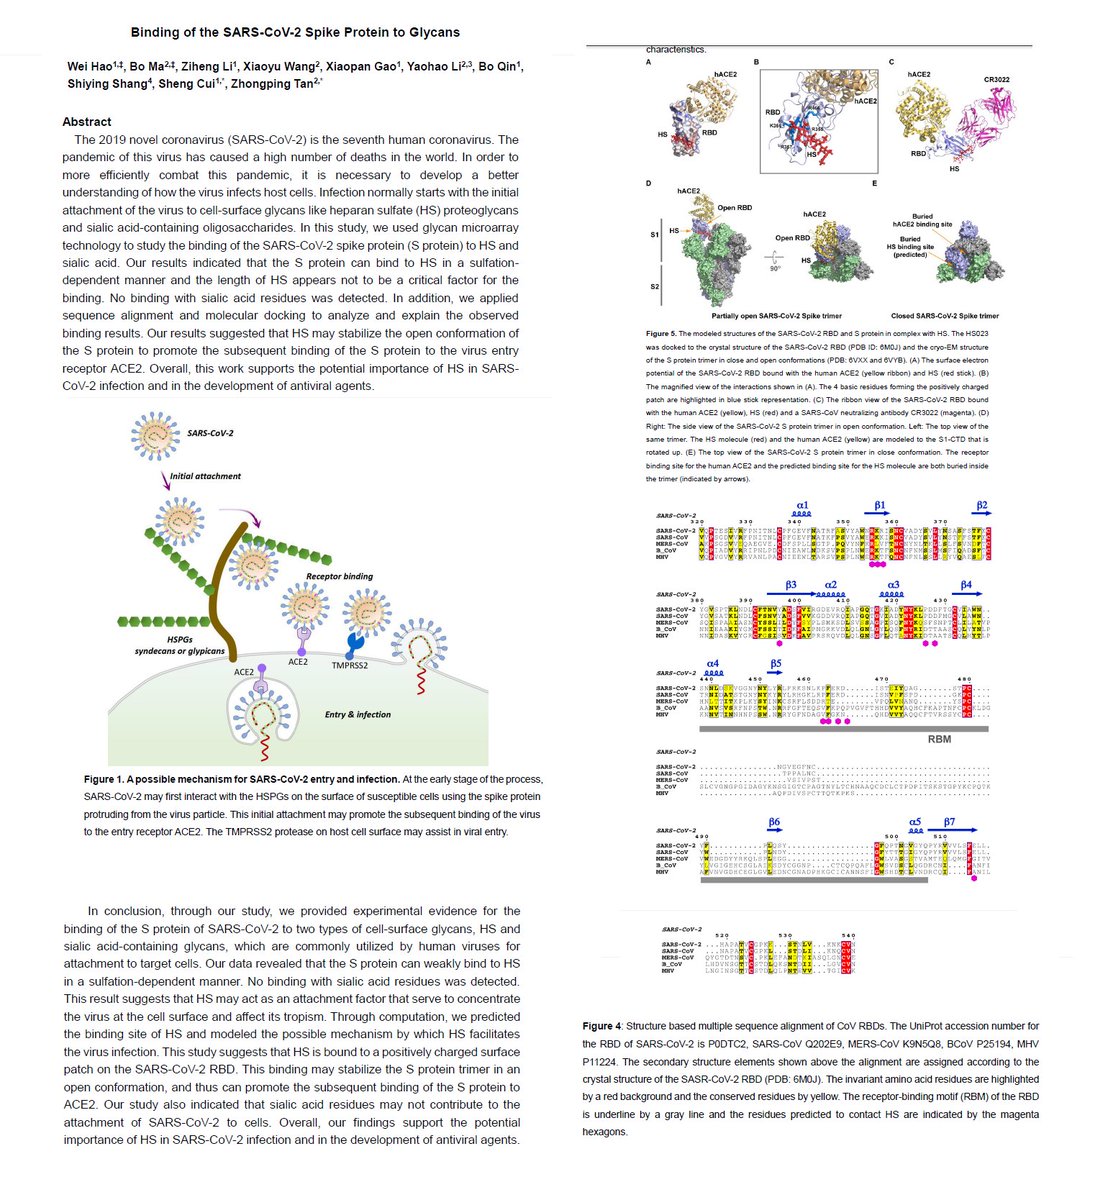 7/ Glycan BindingBinding of the SARS-CoV-2 Spike Protein to Glycans https://www.biorxiv.org/content/10.1101/2020.05.17.100537v1.full.pdfThe 2019 coronavirus (SARS-CoV-2) surface protein (Spike) S1 Receptor Binding Domain undergoes conformational change upon heparin binding https://www.biorxiv.org/content/10.1101/2020.02.29.971093v2